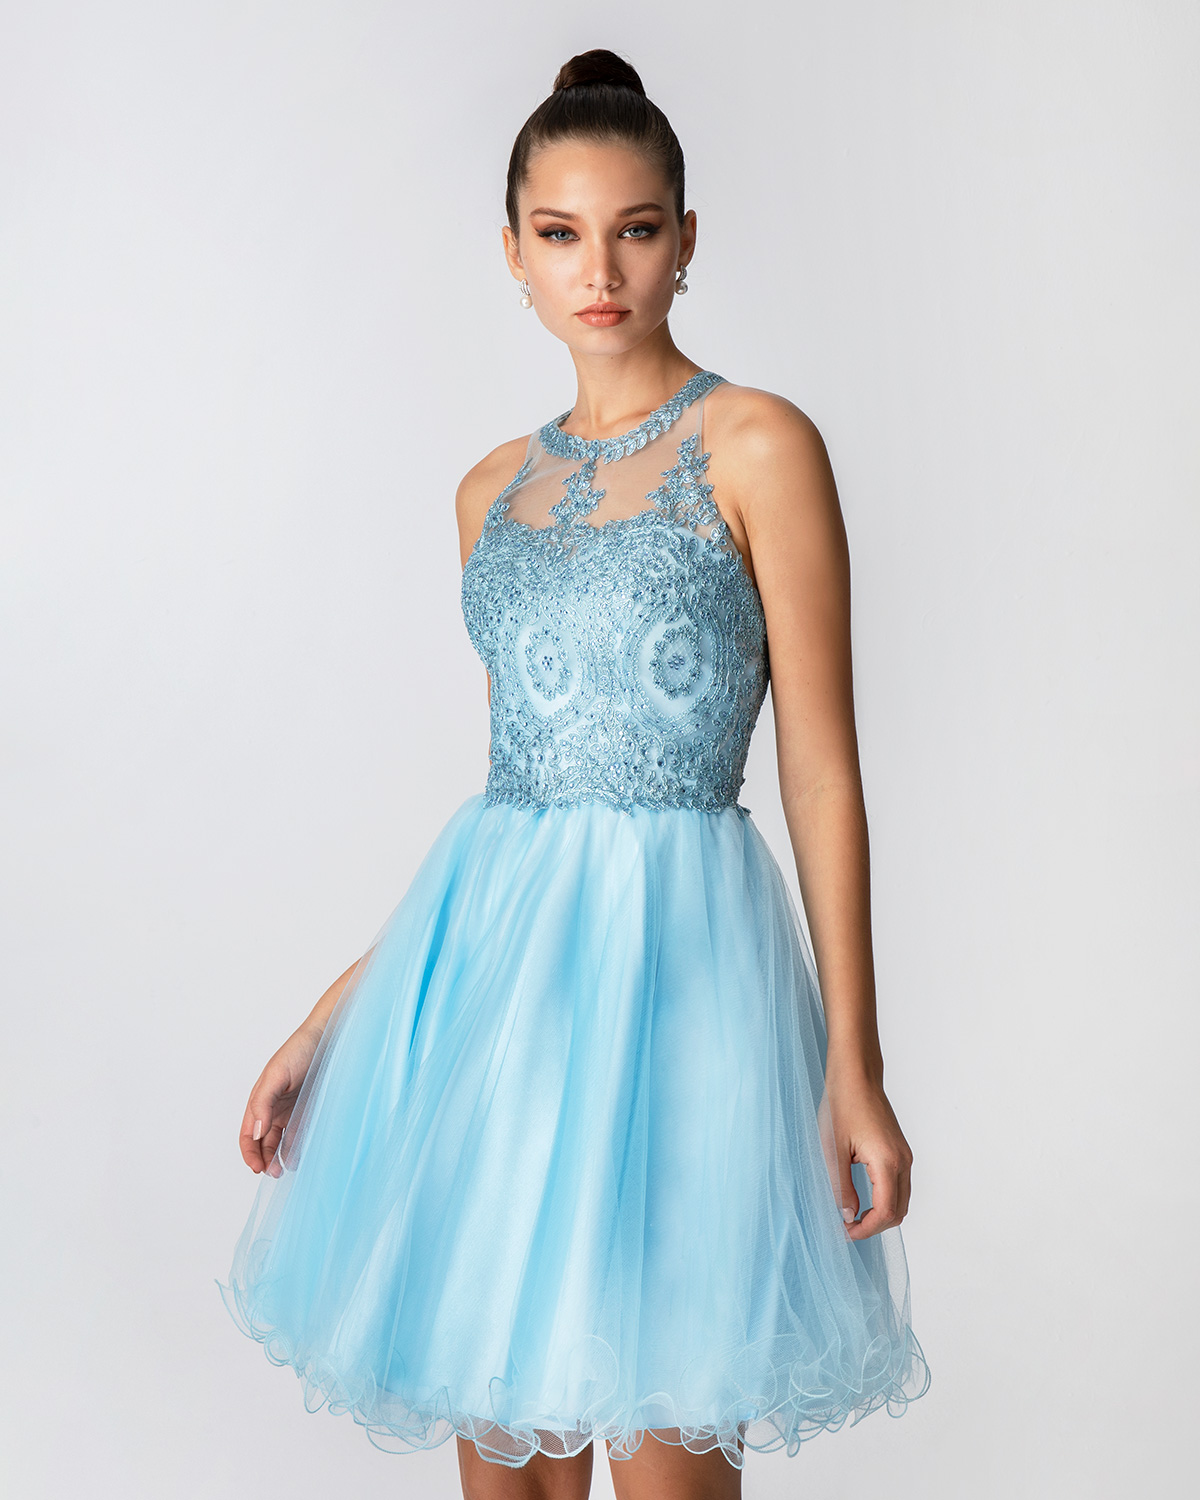 Cocktail Dresses / Cocktail short tulle dress with beaded top